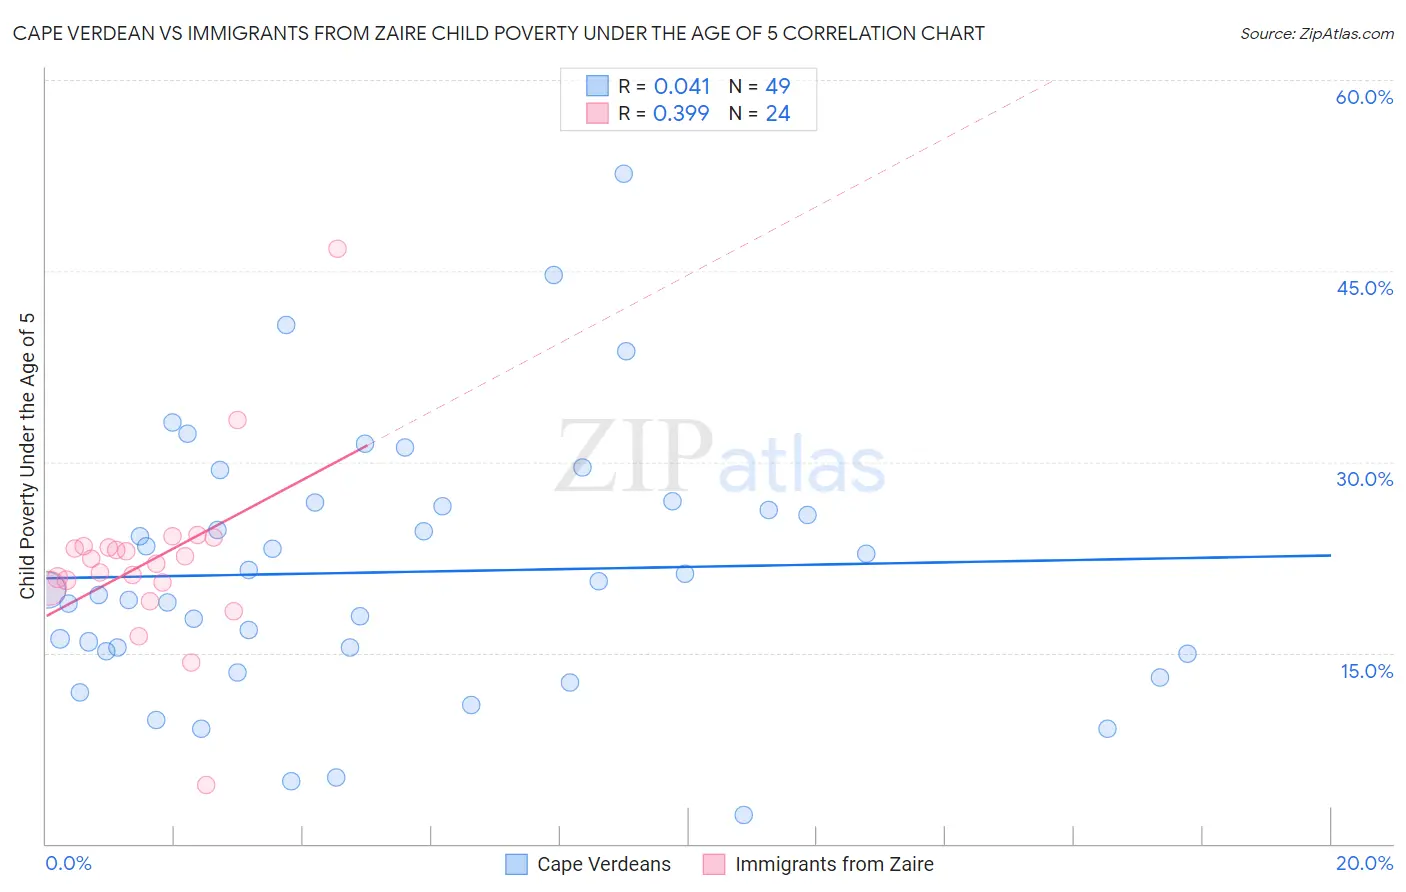 Cape Verdean vs Immigrants from Zaire Child Poverty Under the Age of 5